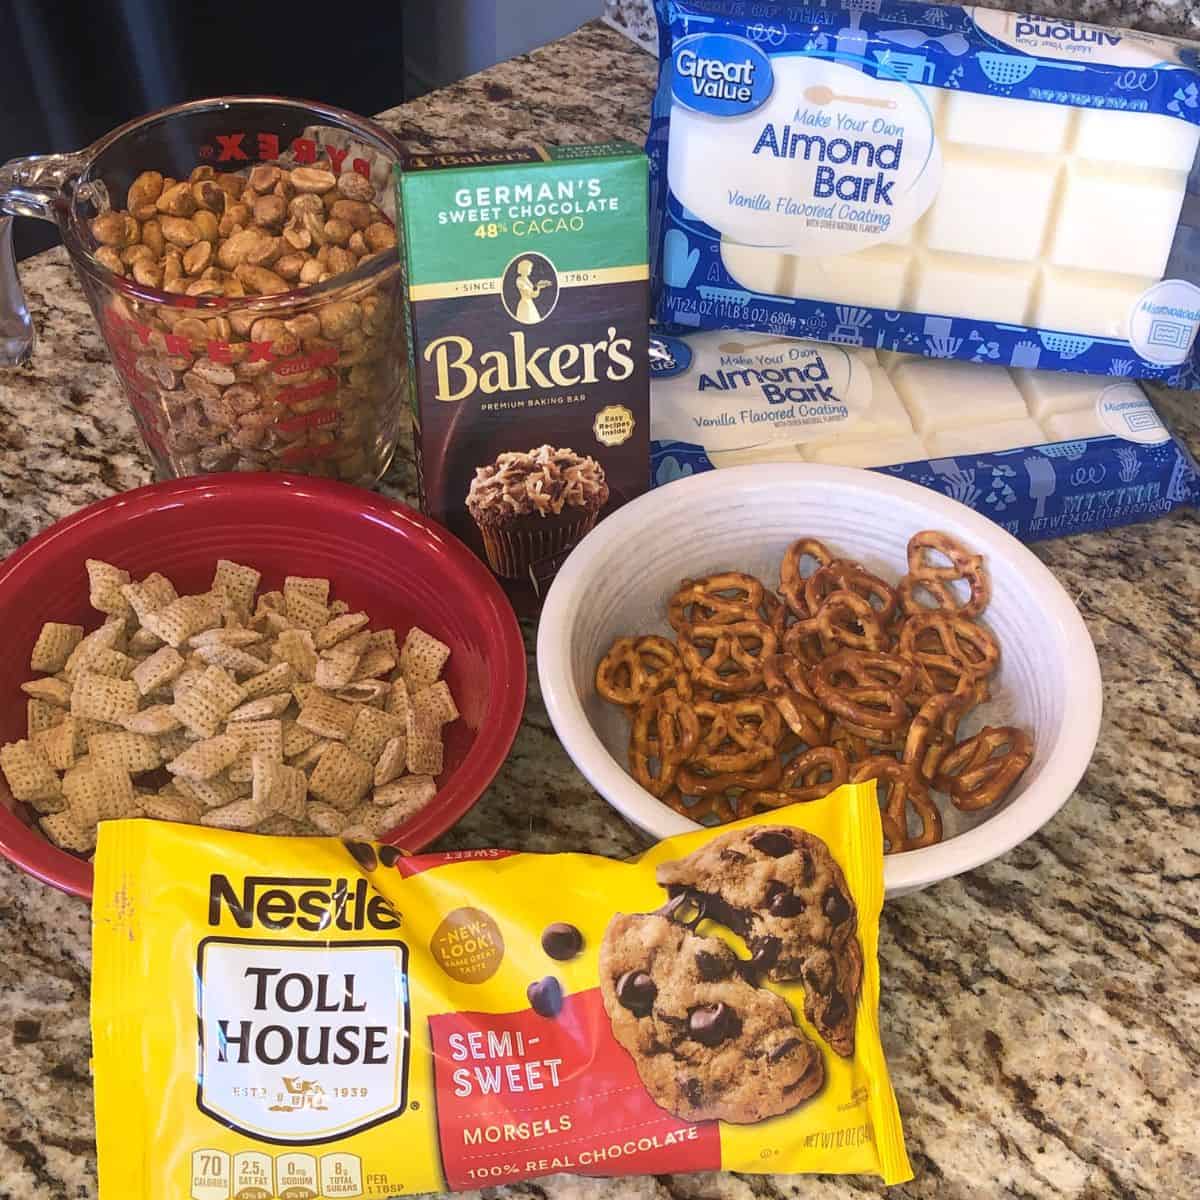 Christmas crockpot crack ingredients - peanuts, pretzels, chocolate chips, bakers chocolate, white chocolate bark, and chex mix